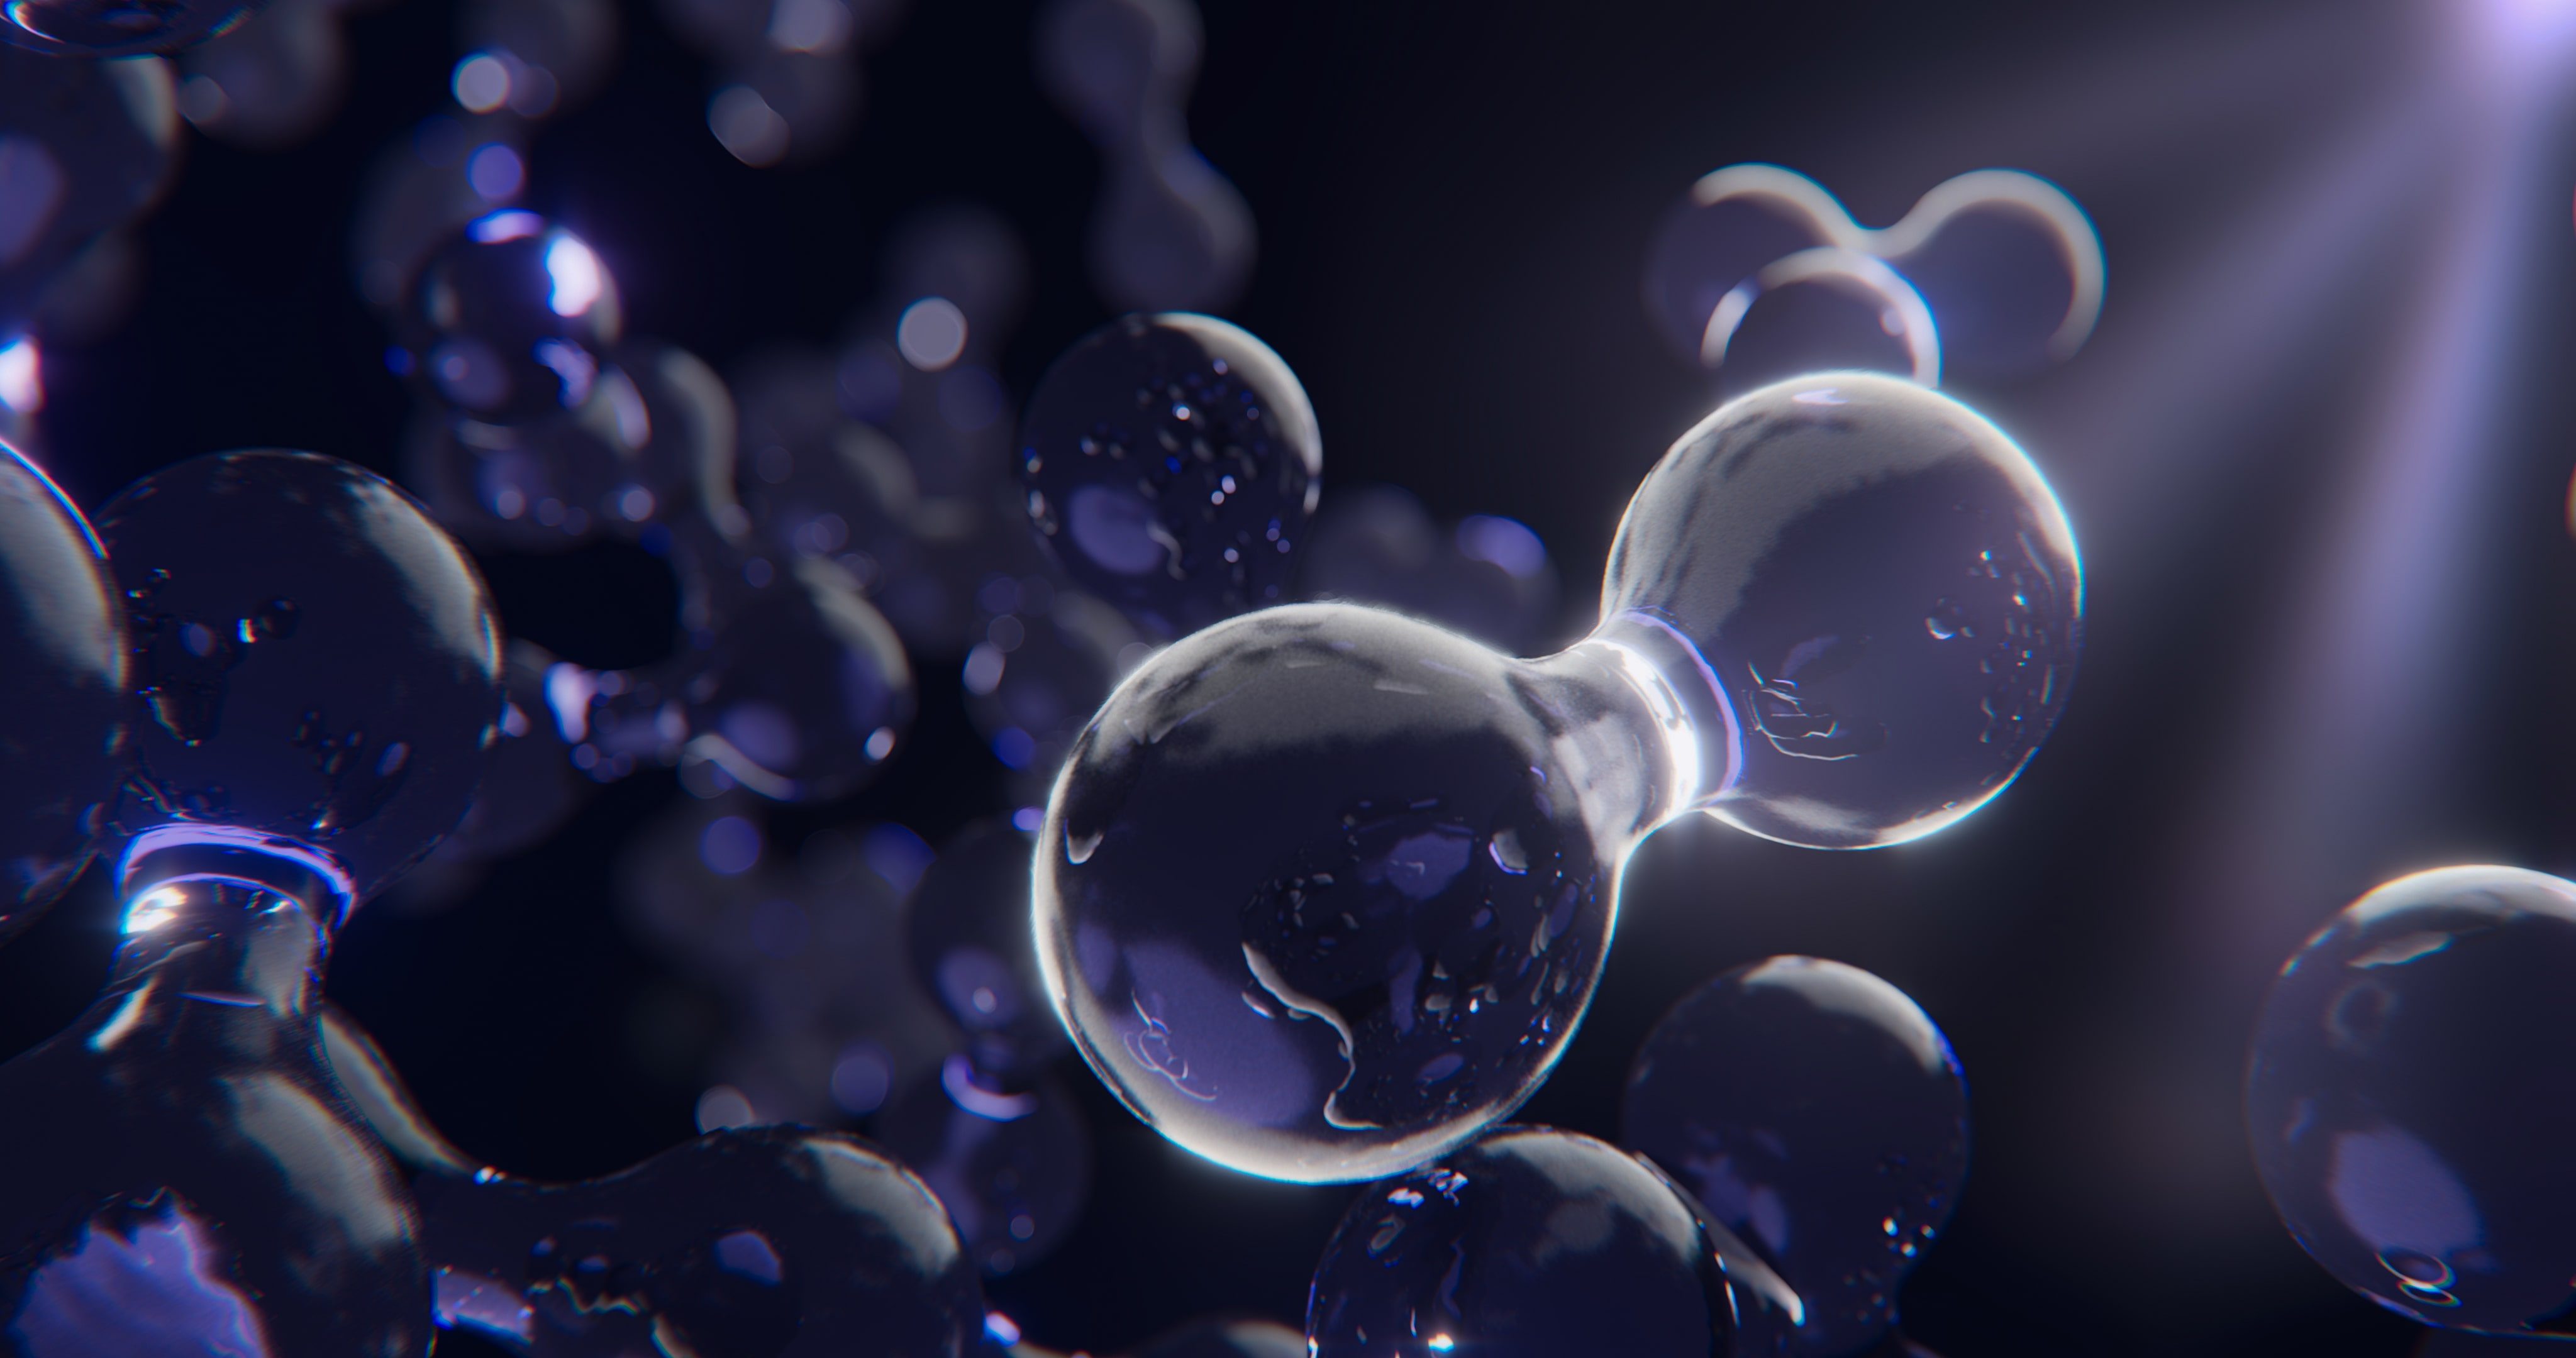 This image shows a multitude of 3D animated hydrogen molecules for FiveT